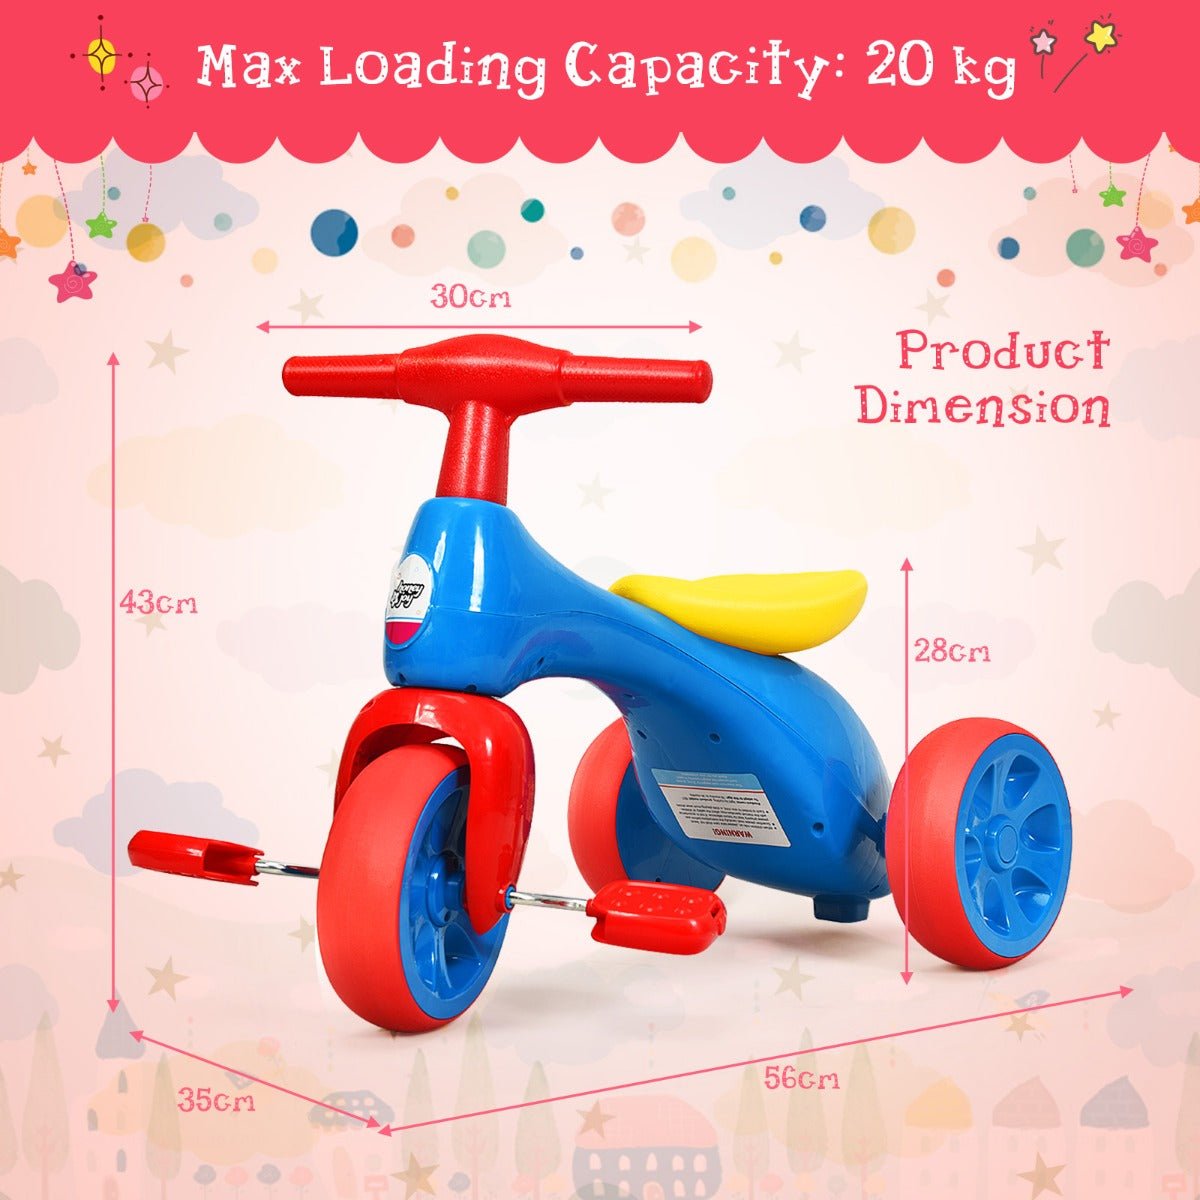 Little Rider's Delight: Blue Foot Pedal Tricycle for Outdoor Adventures